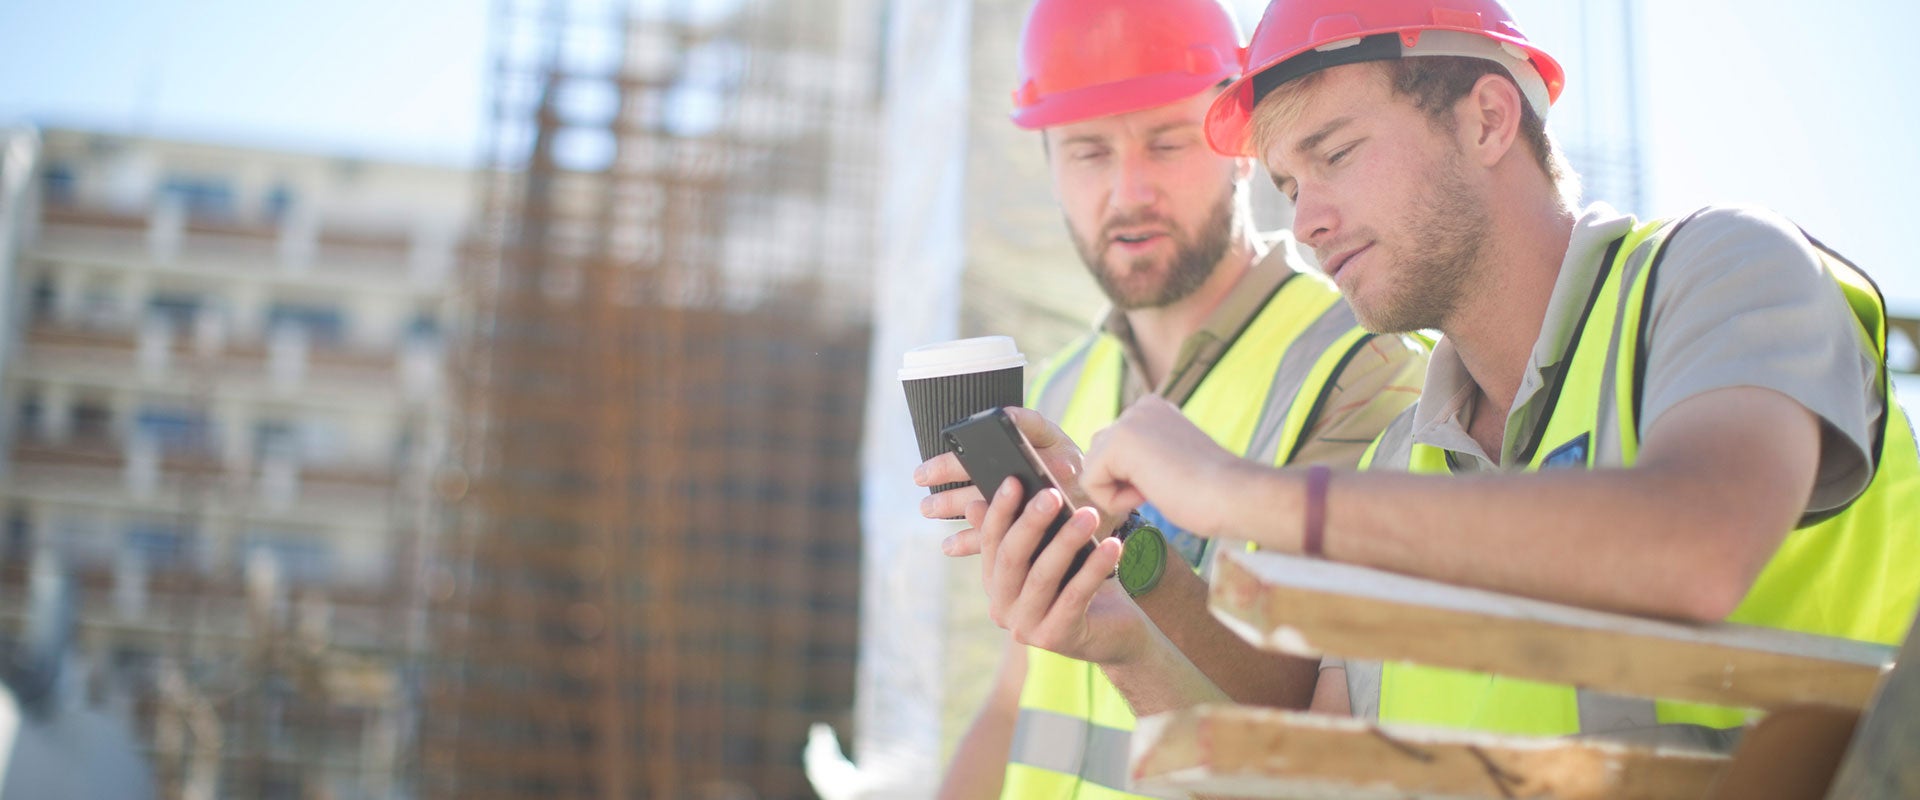 digital disruption in building product manufacturing